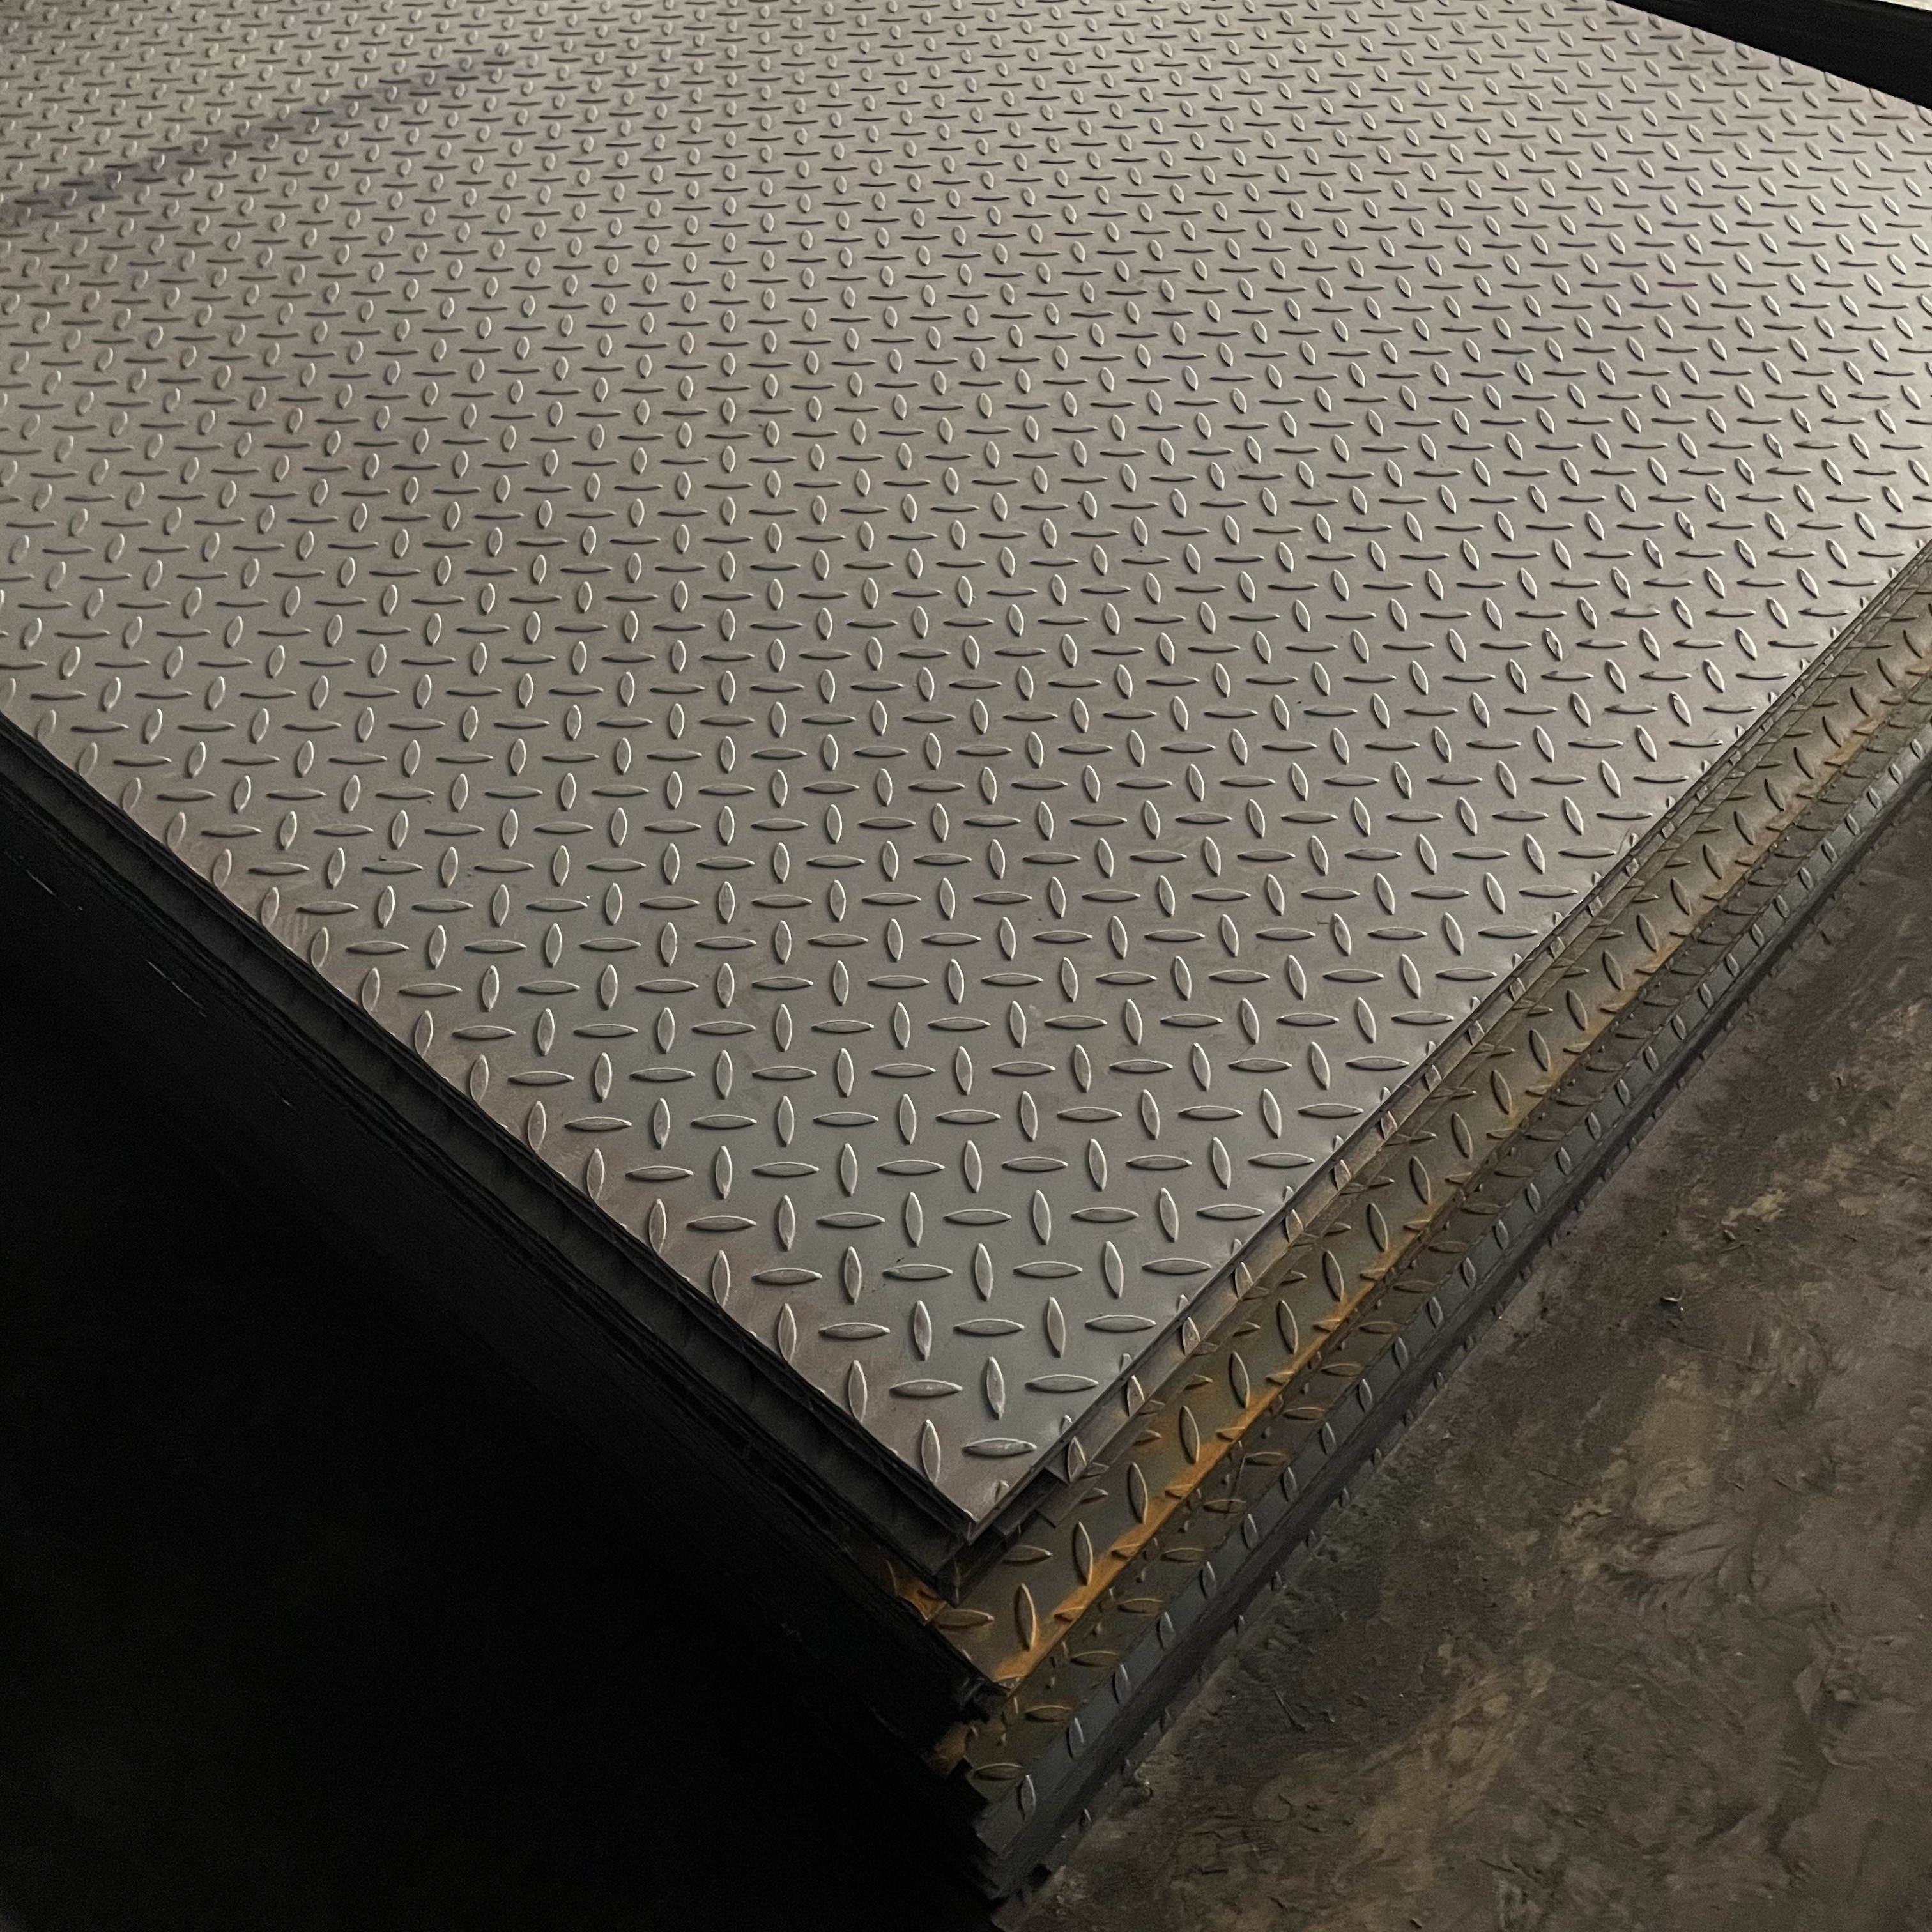 Factory Supply Astm A36 4320 SS 400 Stainless Steel Checkered/Diamond Plates